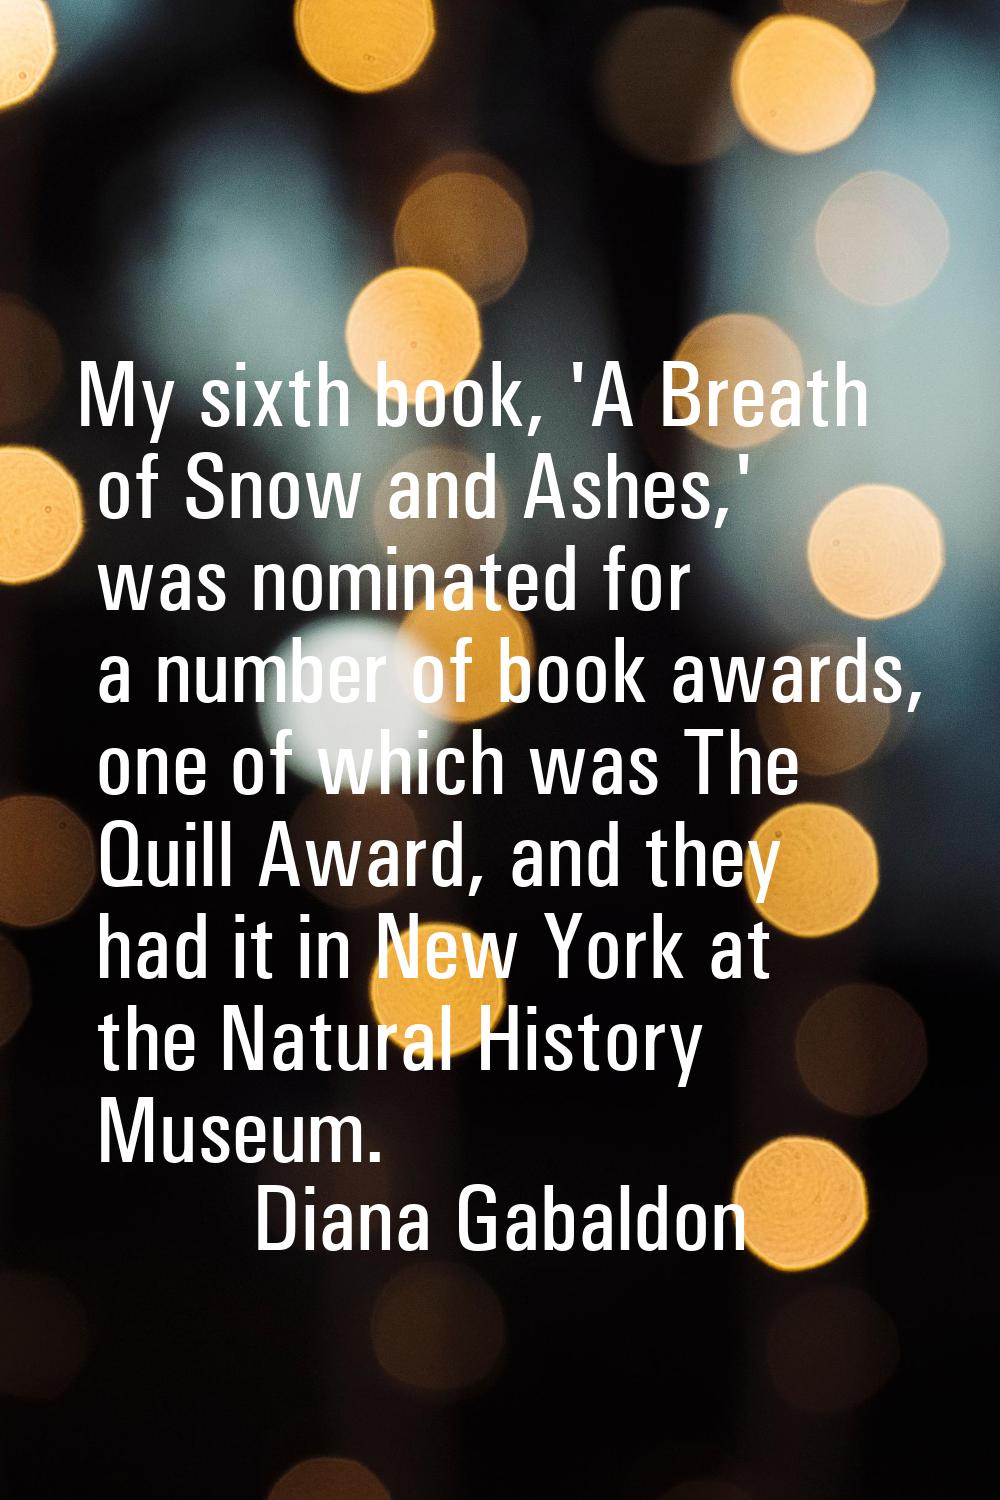 My sixth book, 'A Breath of Snow and Ashes,' was nominated for a number of book awards, one of whic